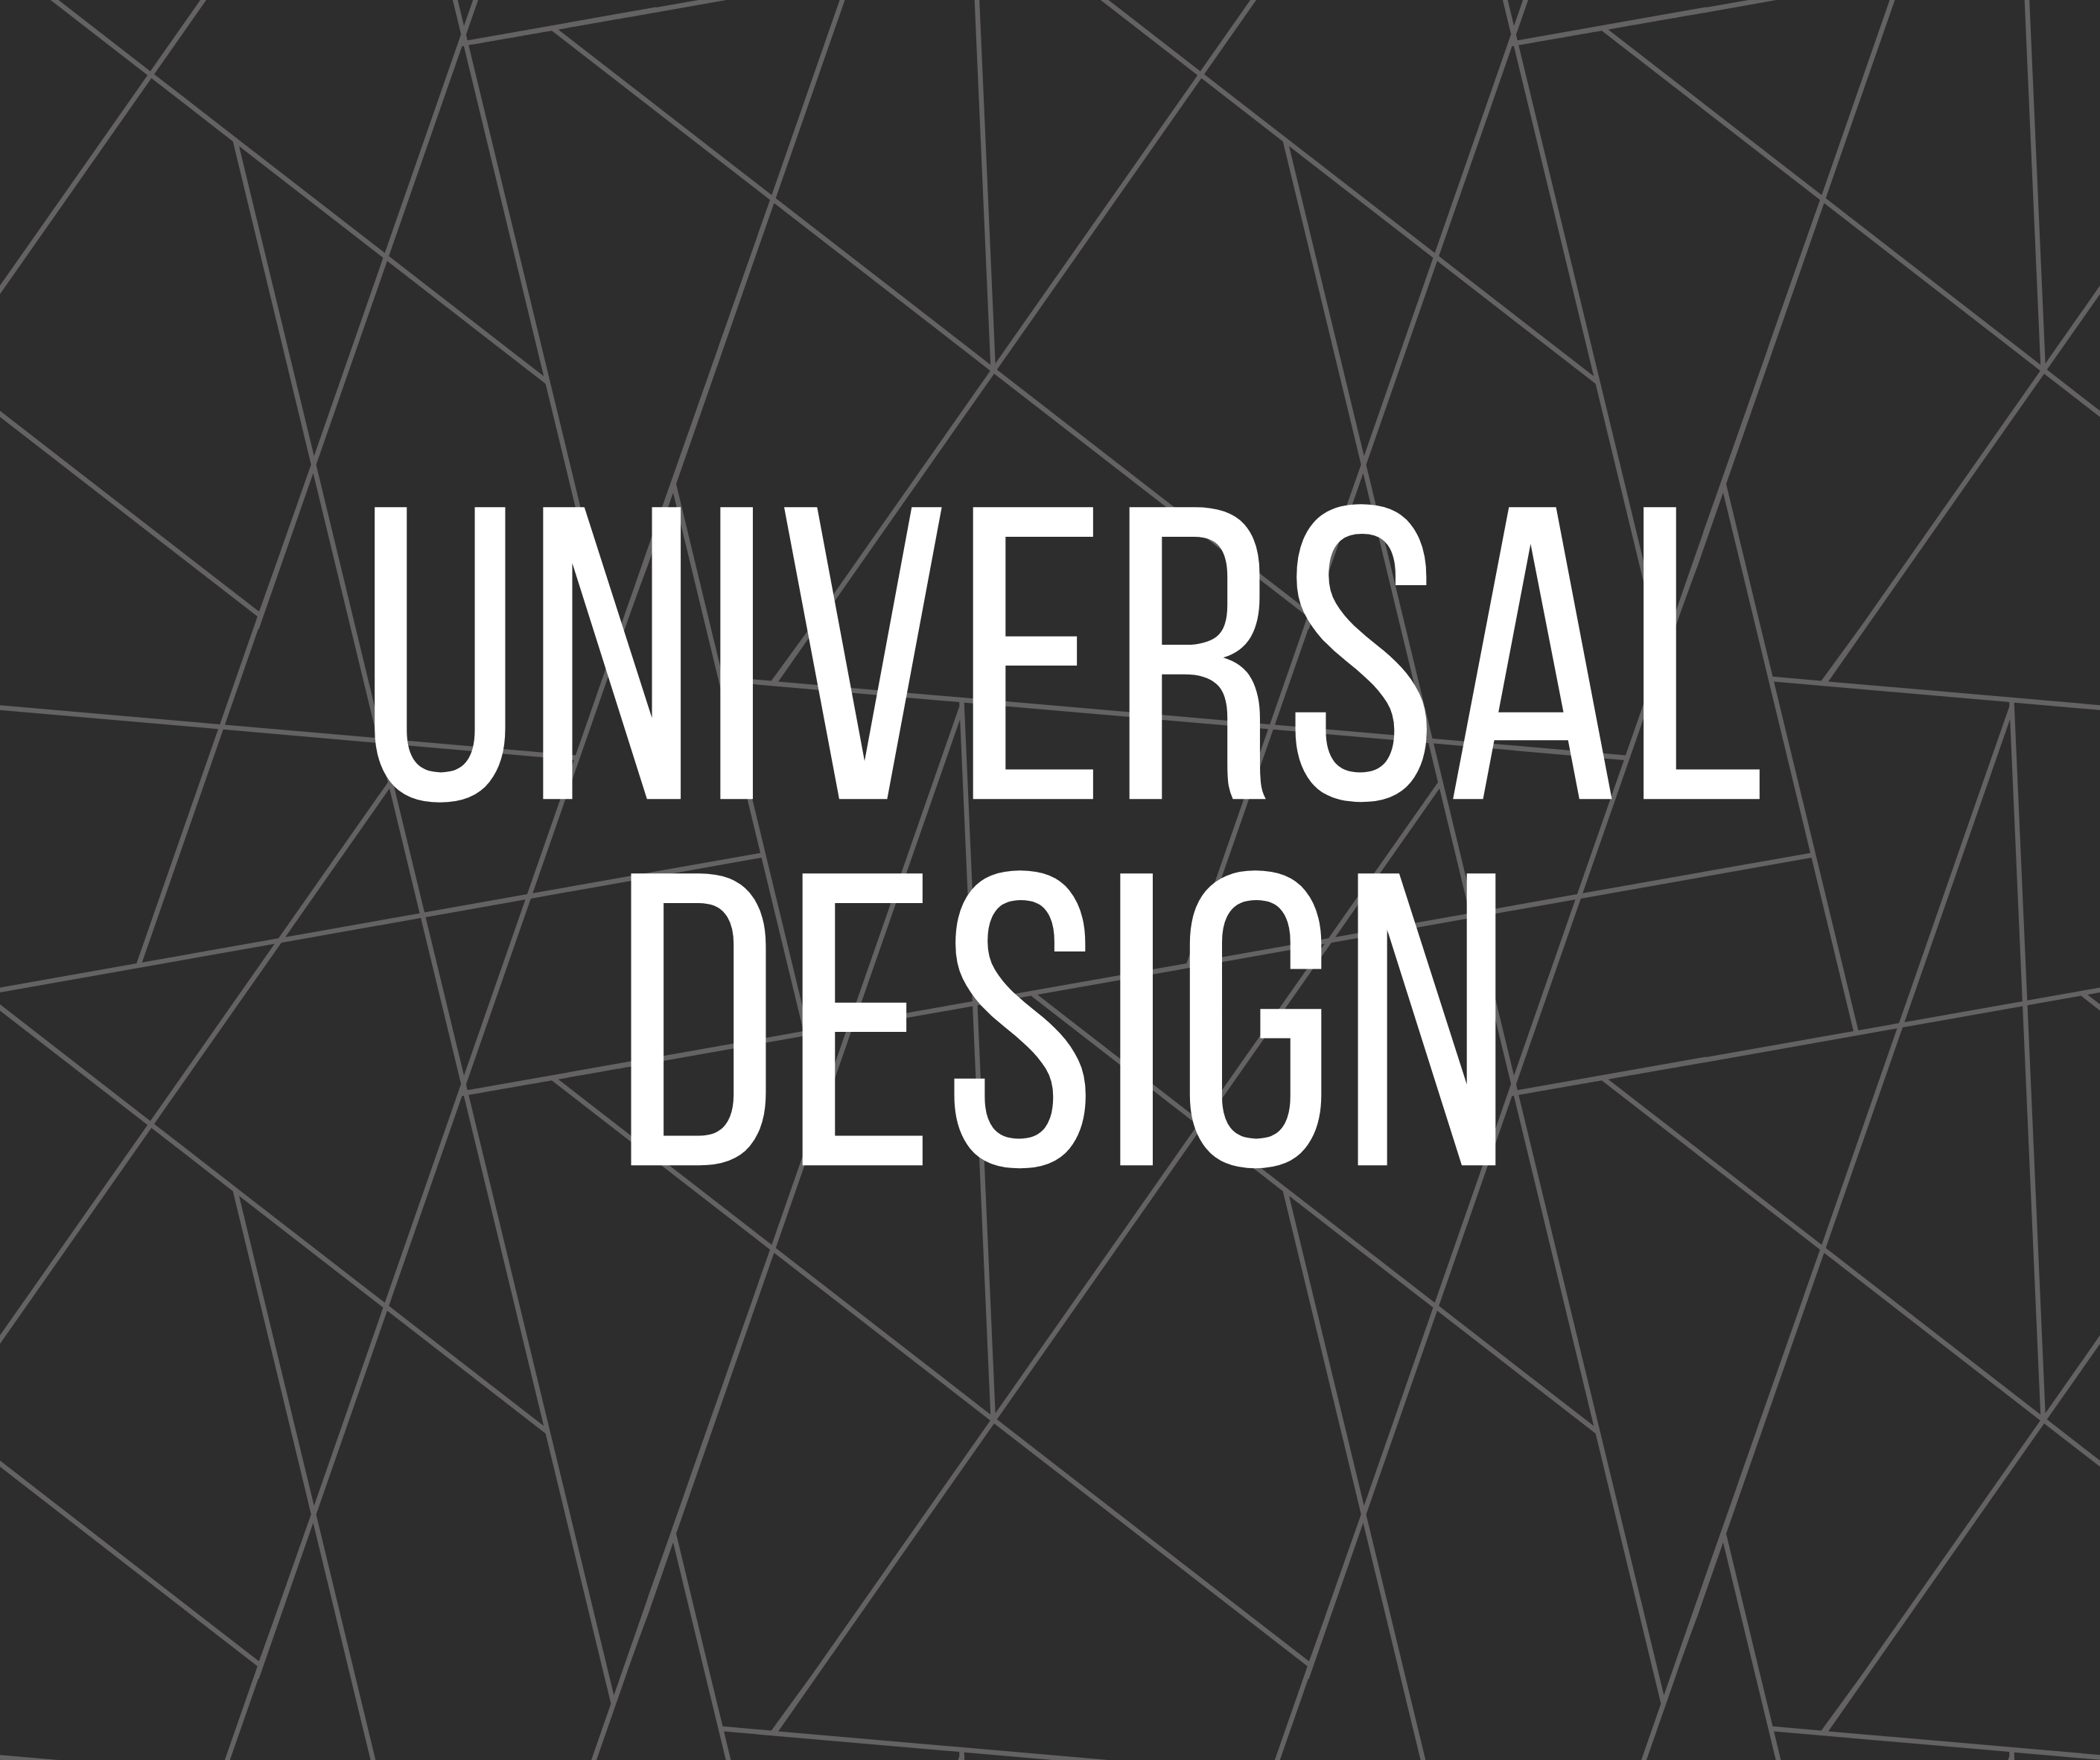 What is Universal Design?